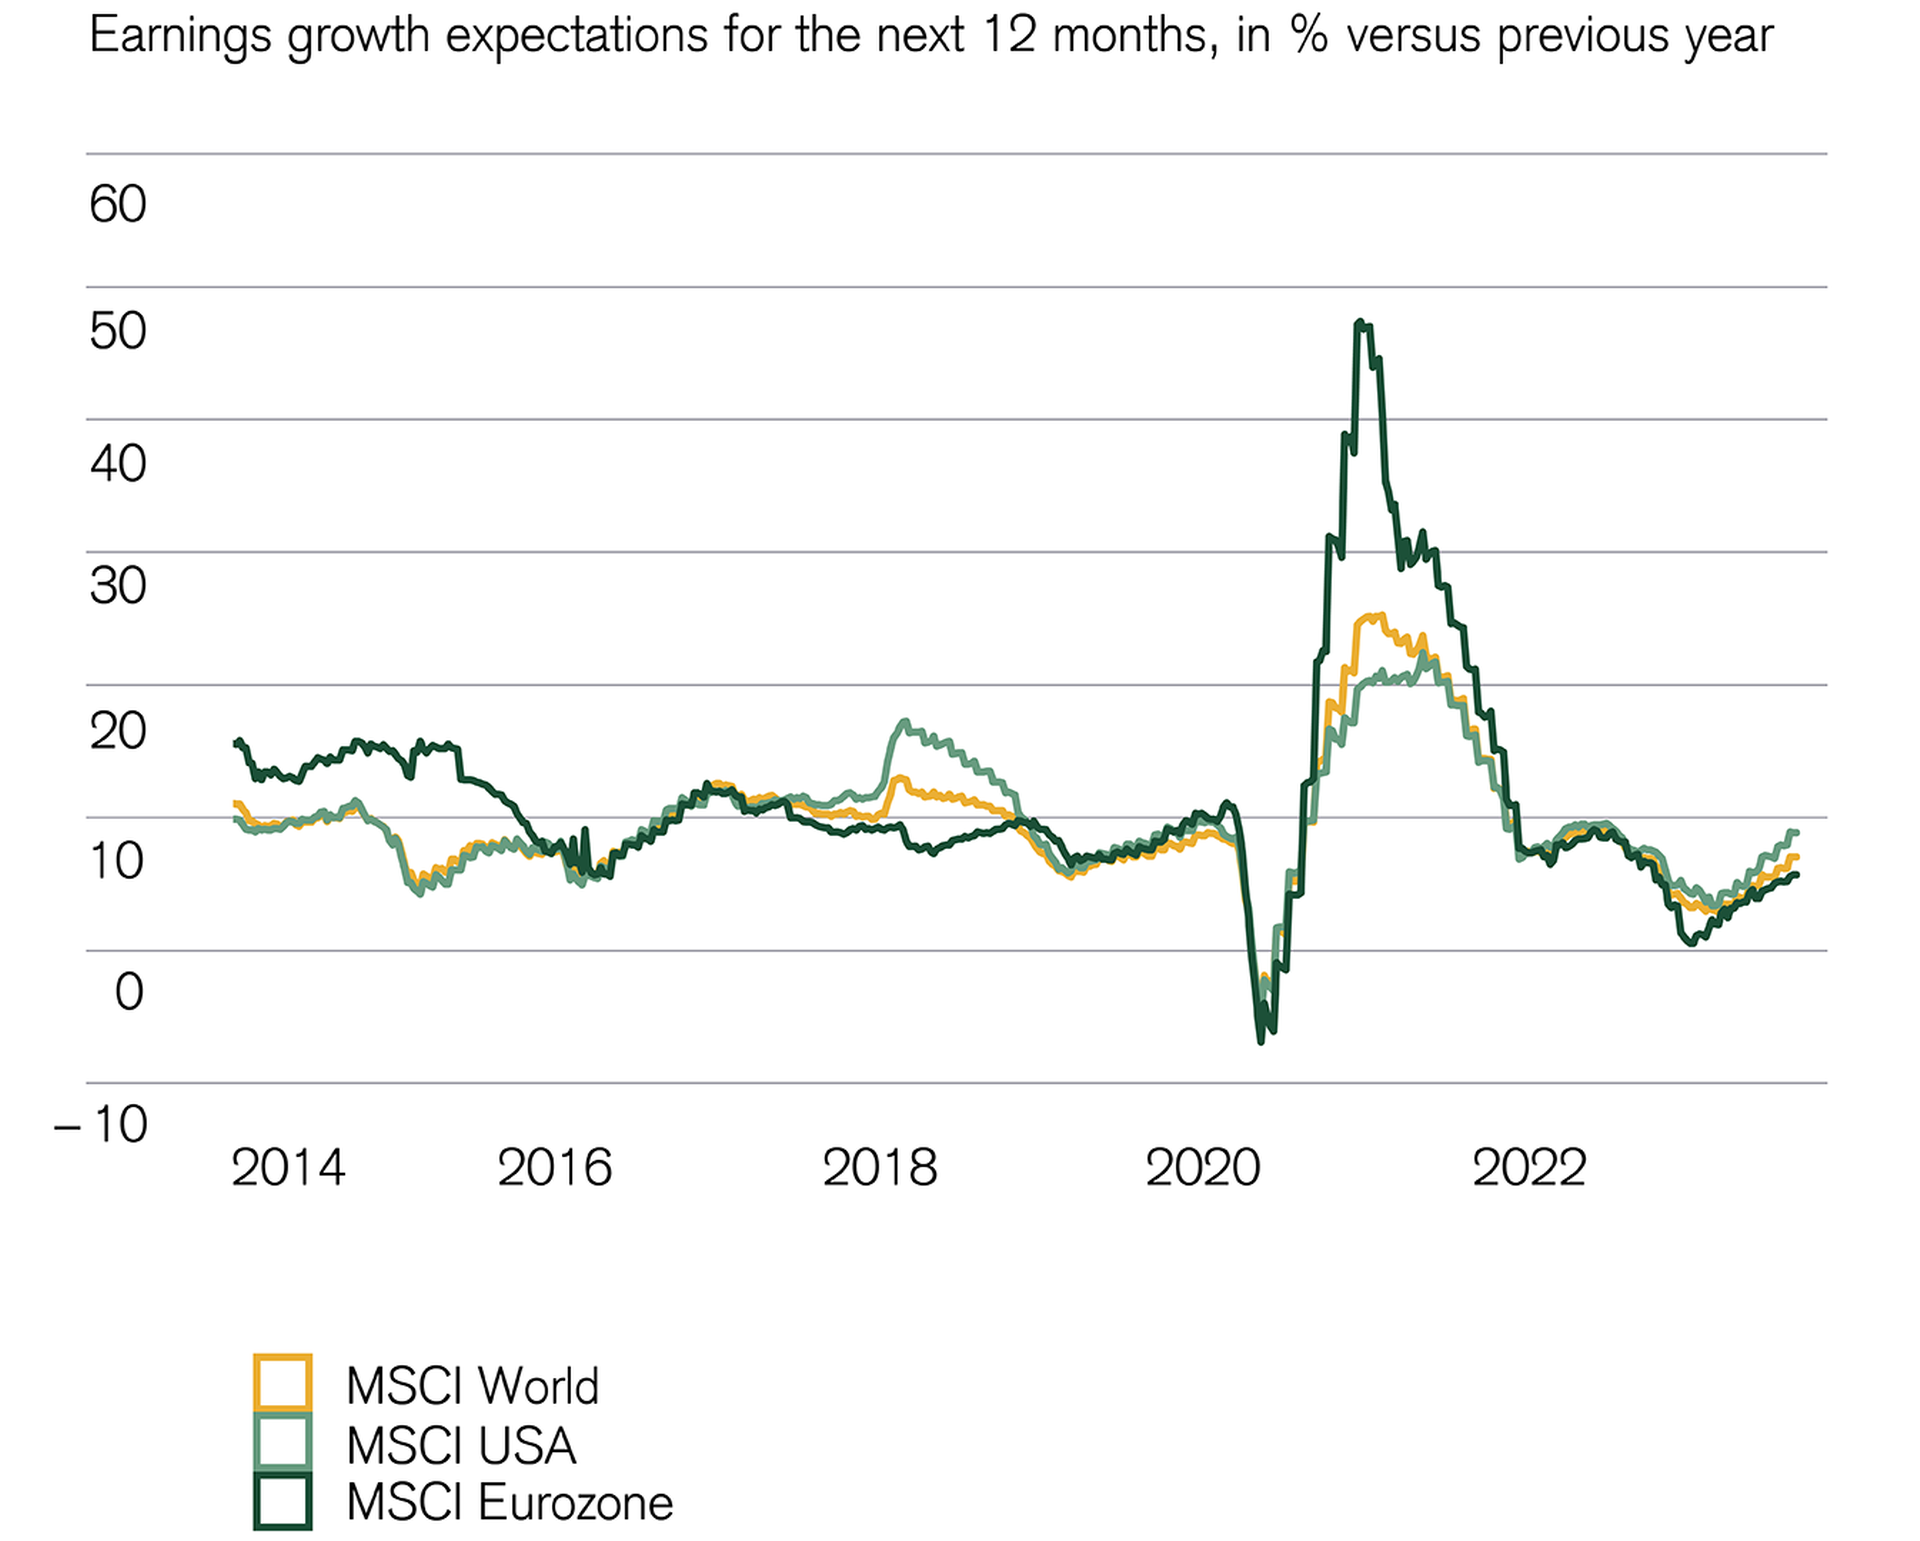 Equities: Earnings growth expectations are improving